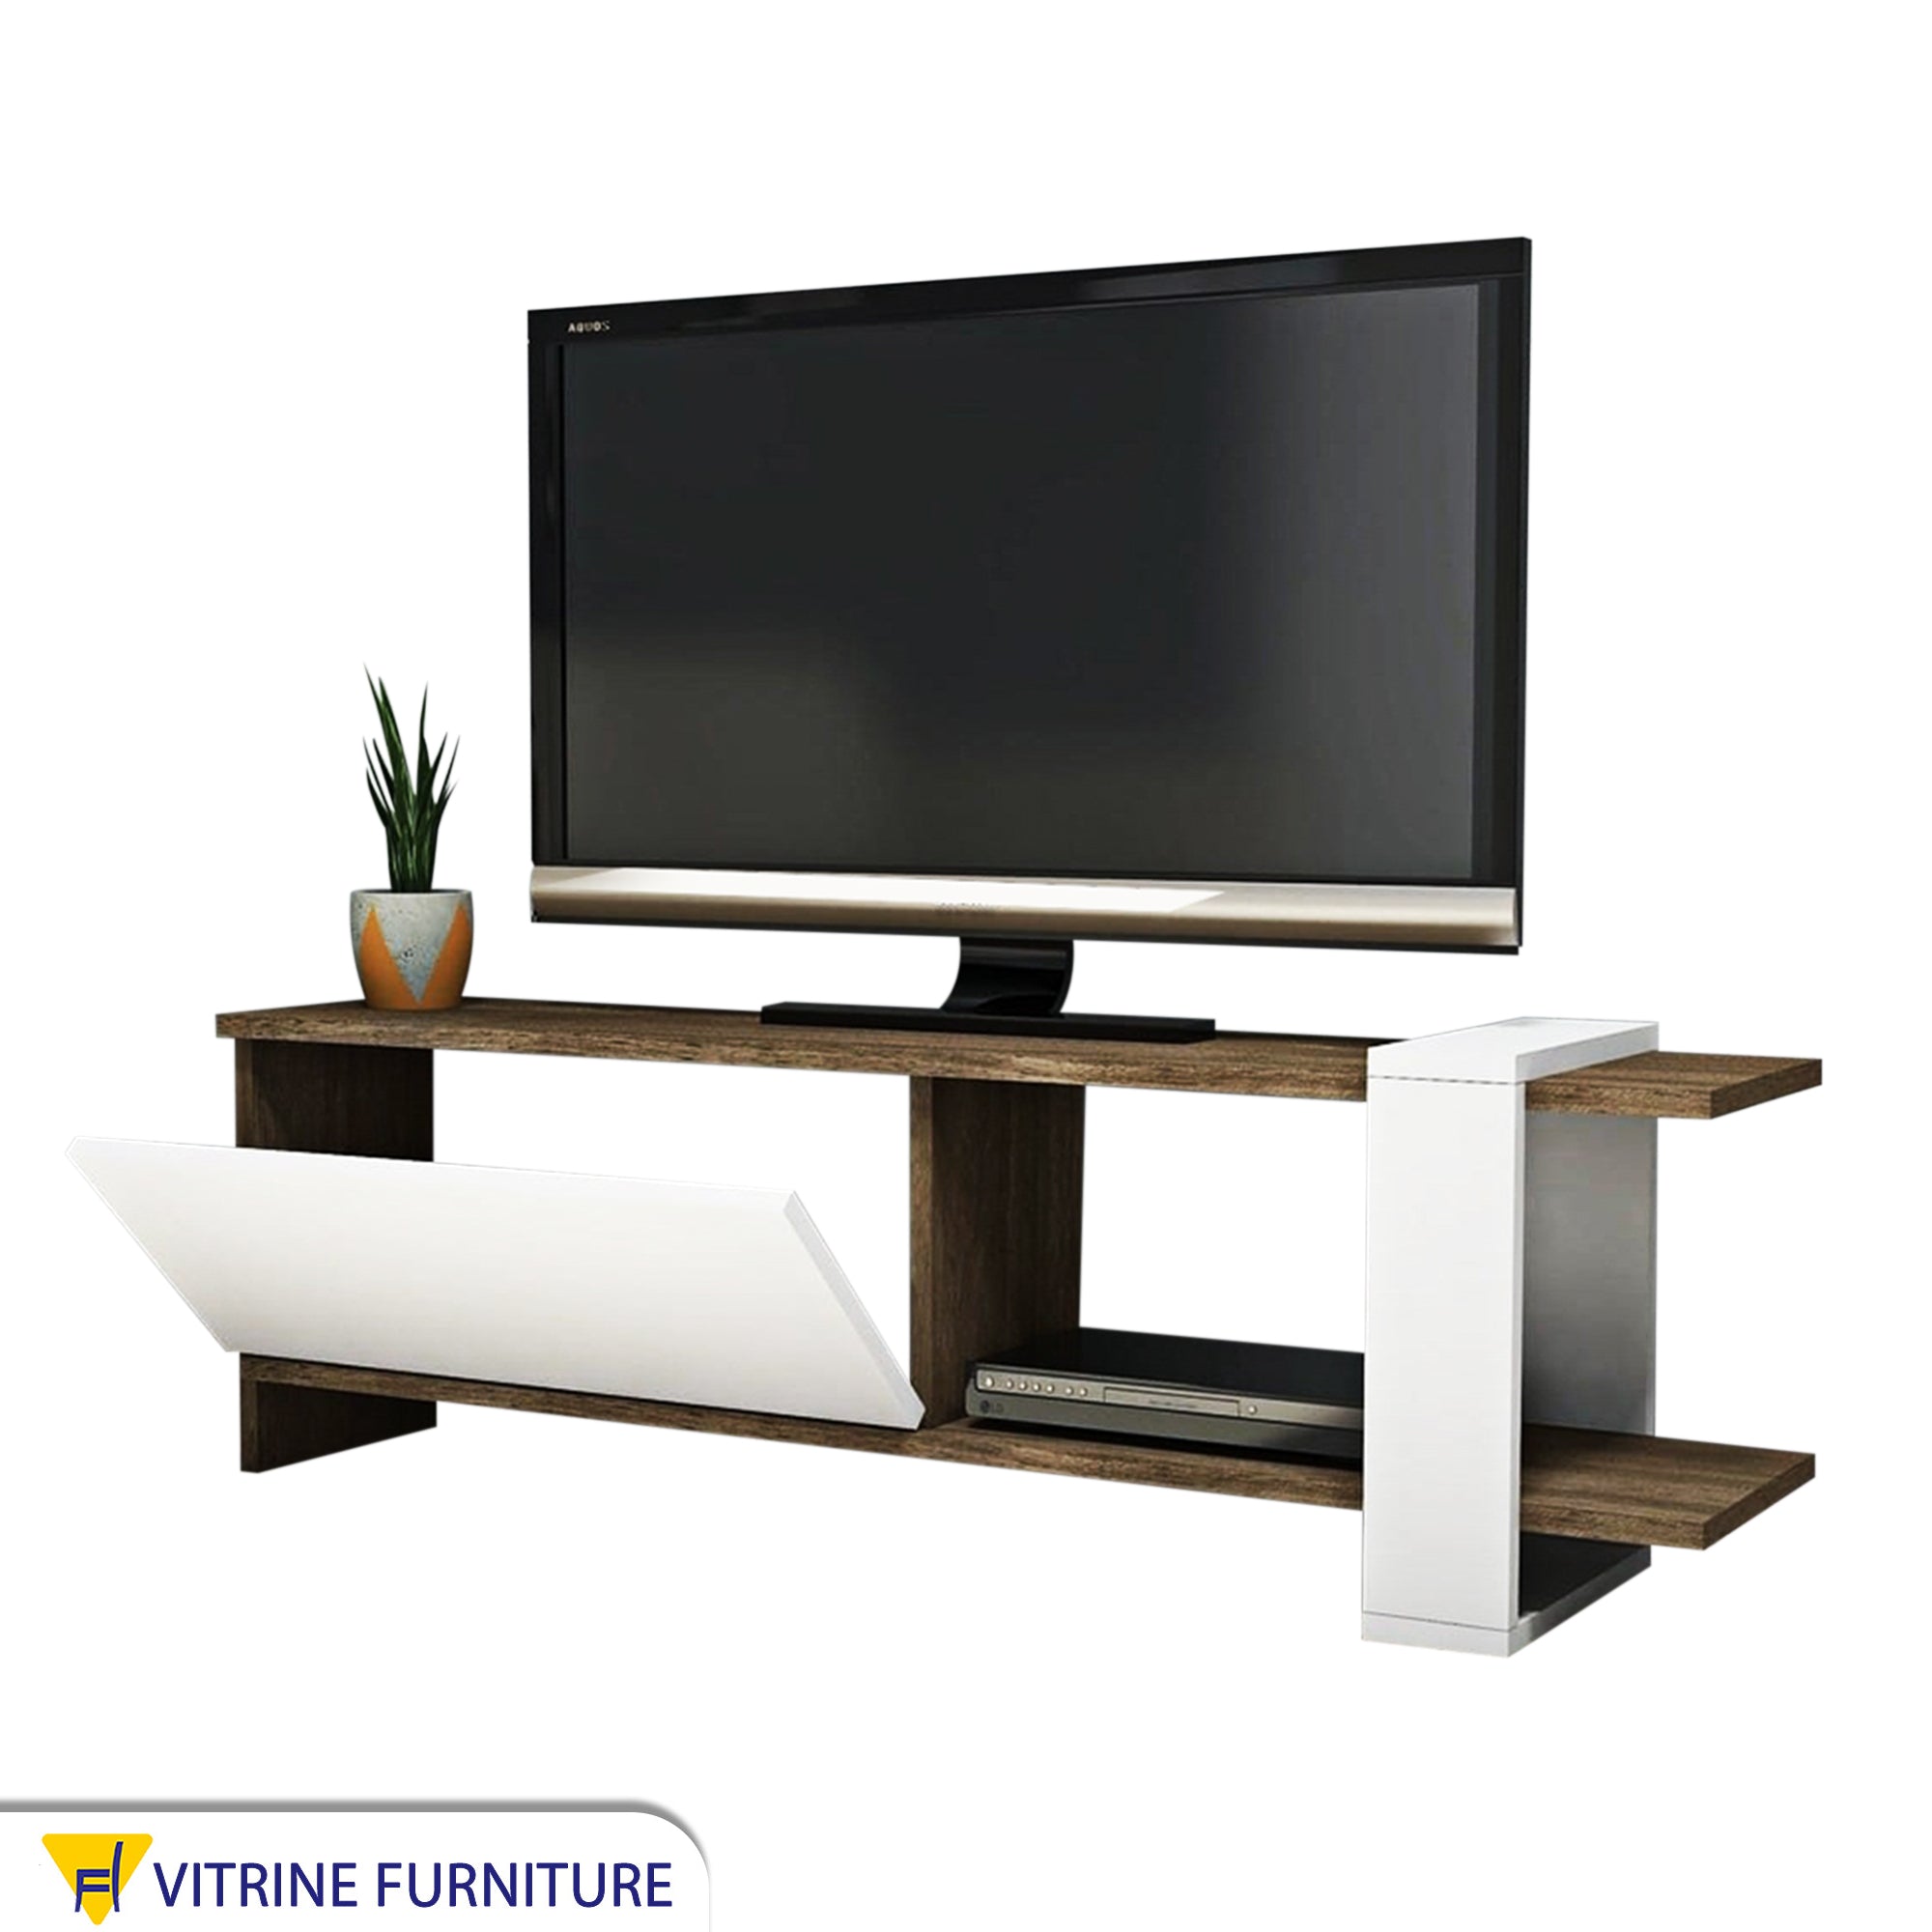 TV table in white and dark brown